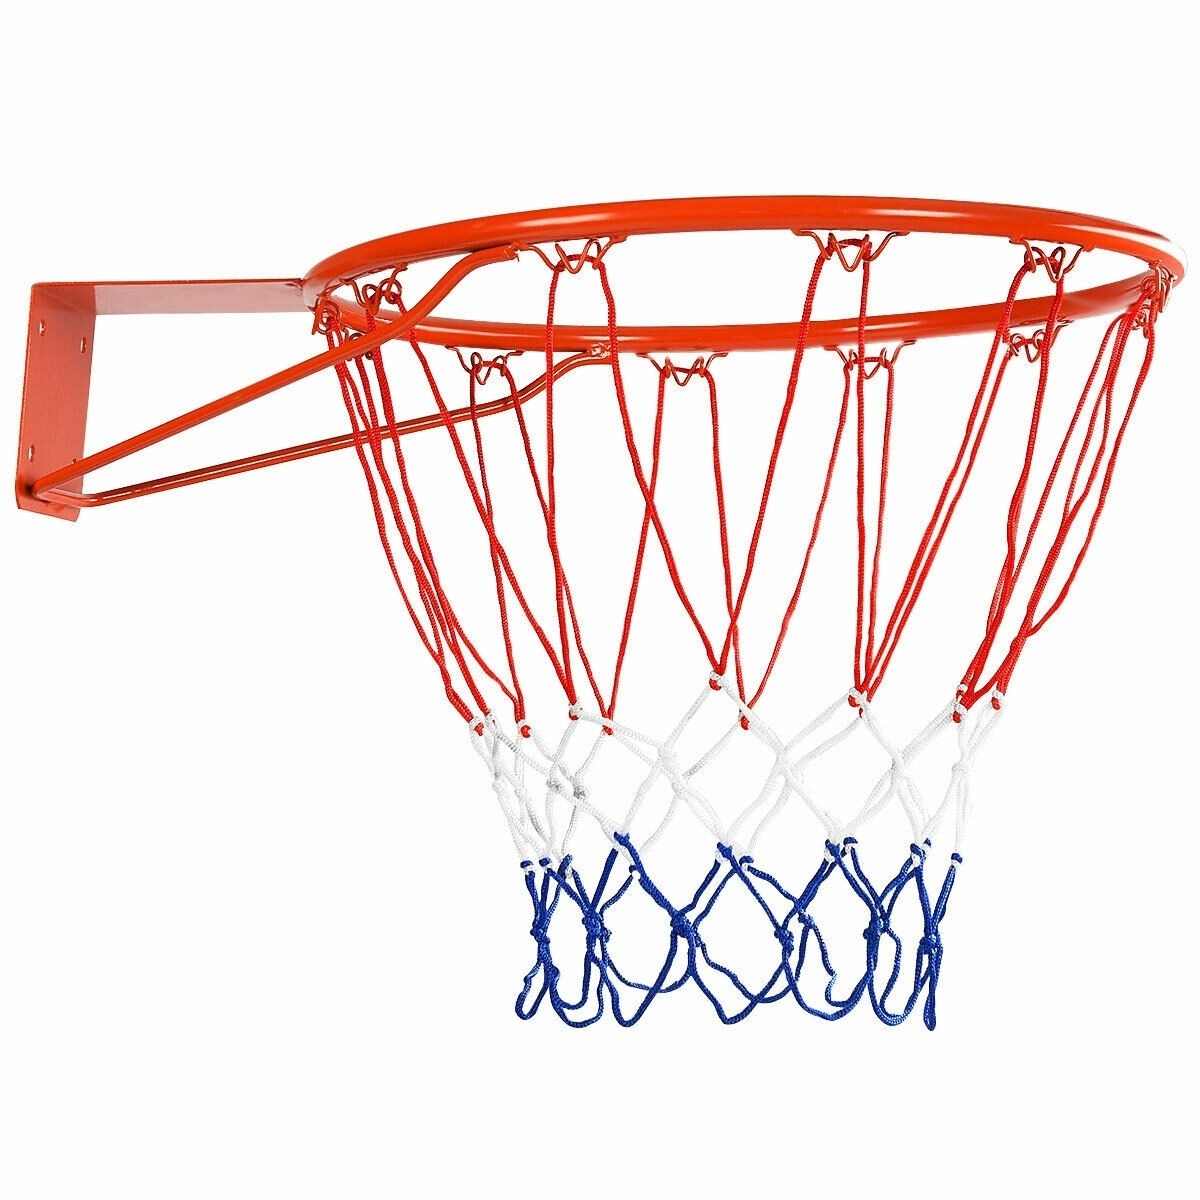 LouisaYork Basketball Hoop Net Indoor Outdoor Basketball Ring with Mounting Screws Wall Mounted Hanging Basket Replacement for Children Adults 32cm 